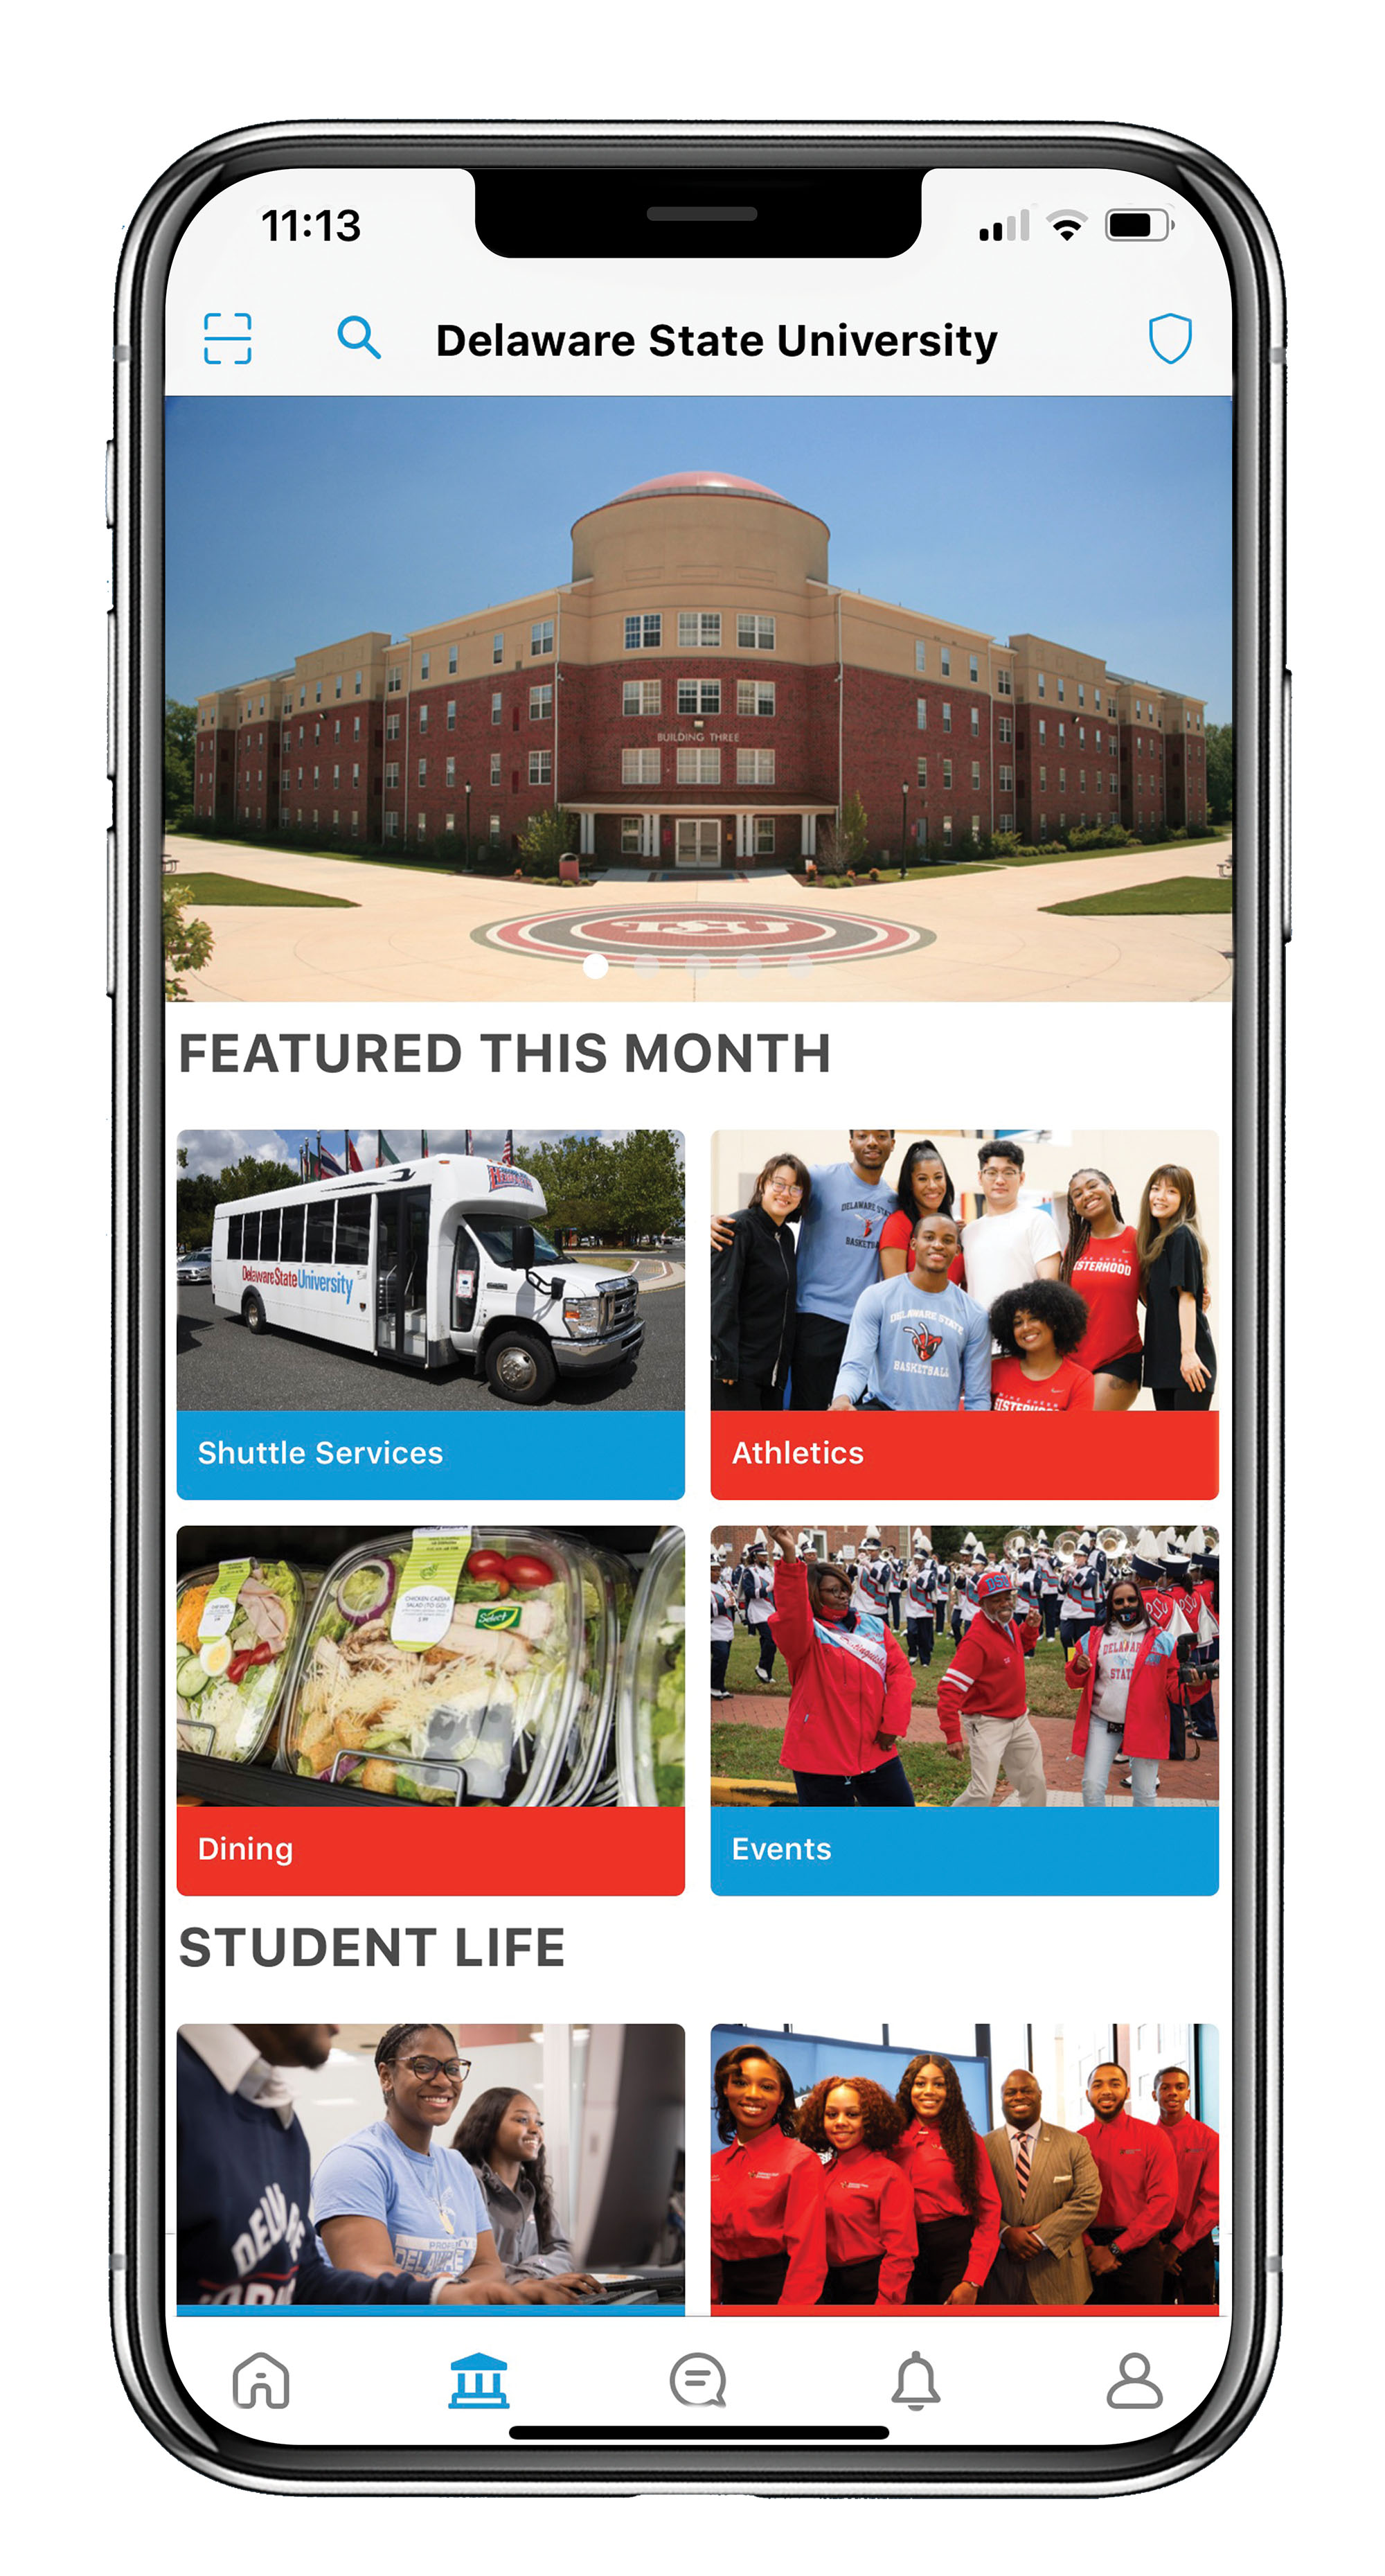 The DSU HUB app has many functions that connect students to virtually all aspects of University life.